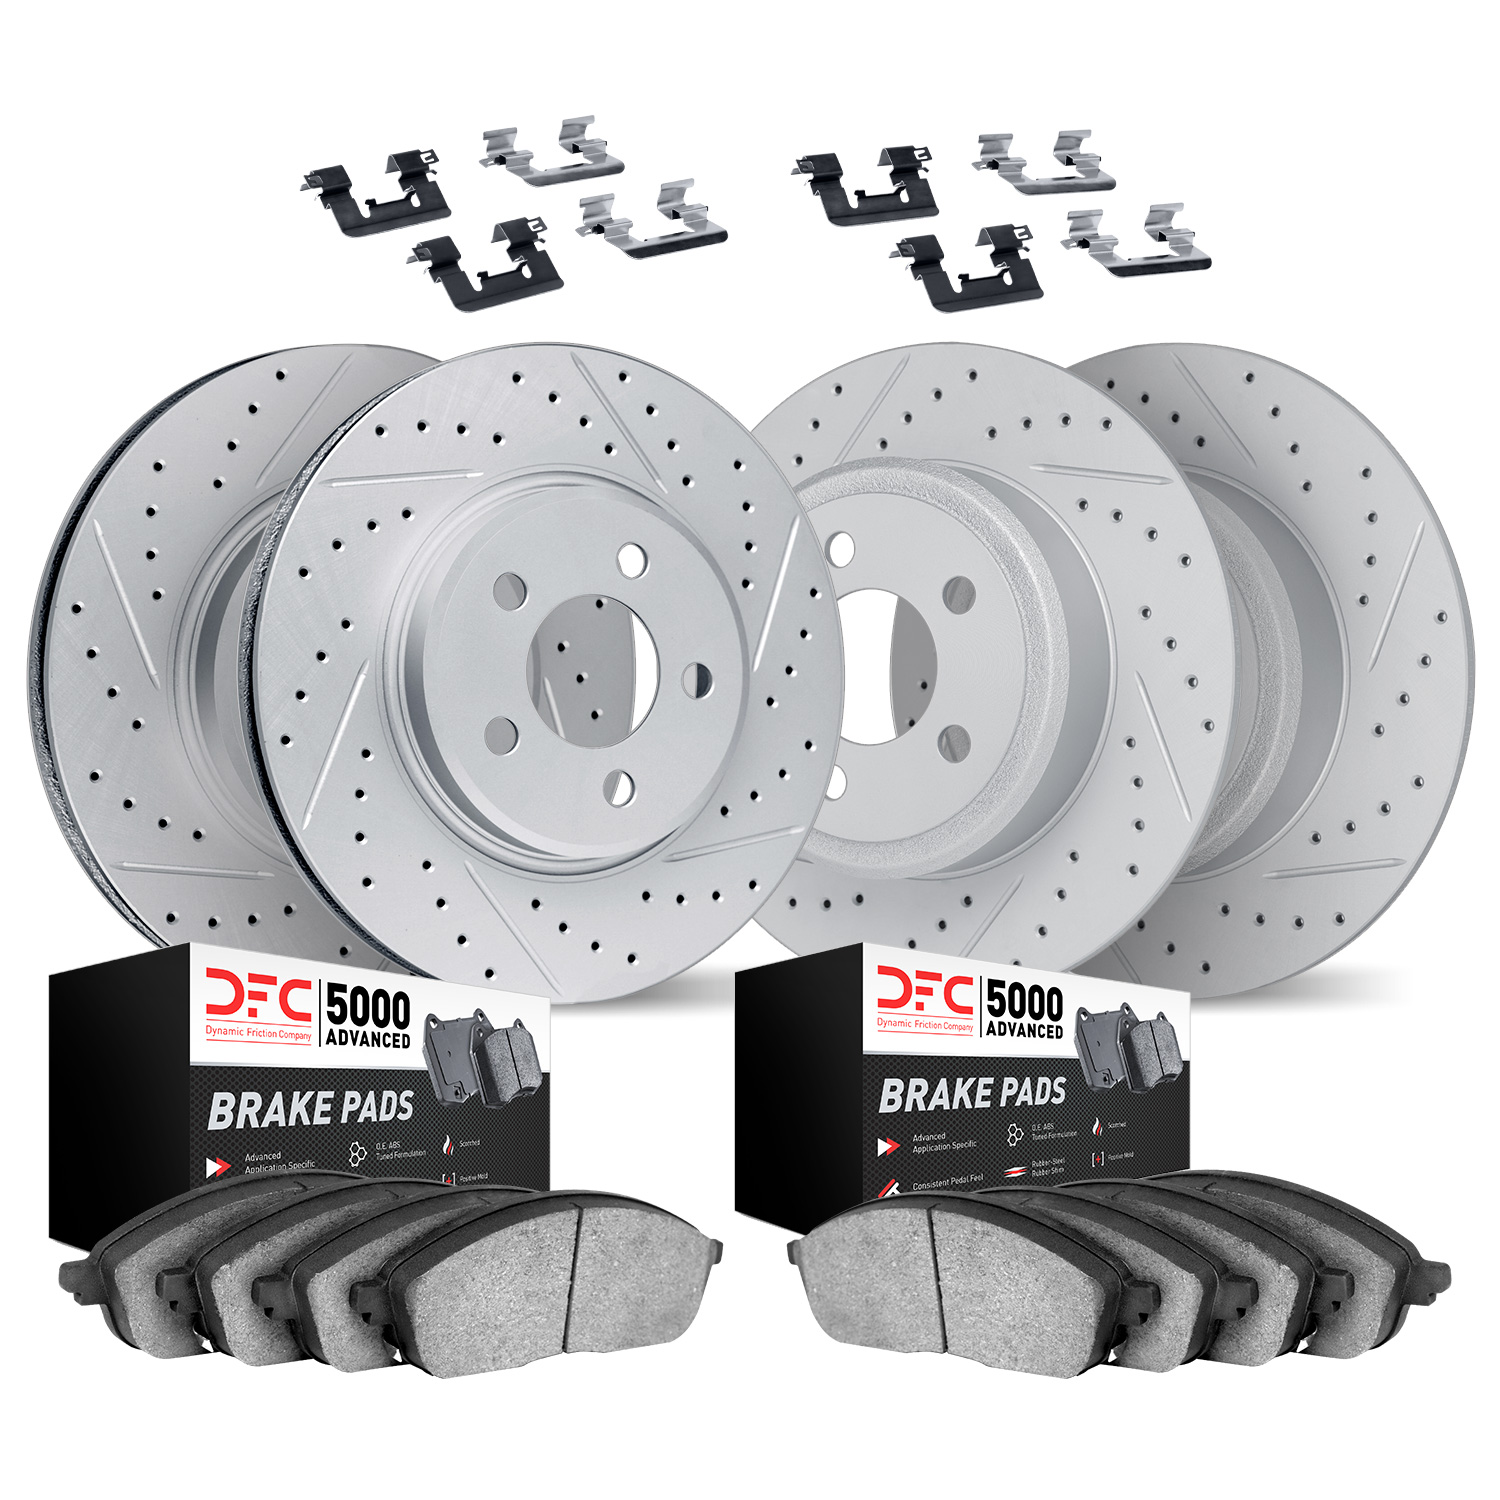 2514-31040 Geoperformance Drilled/Slotted Rotors w/5000 Advanced Brake Pads Kit & Hardware, 2000-2006 BMW, Position: Front and R